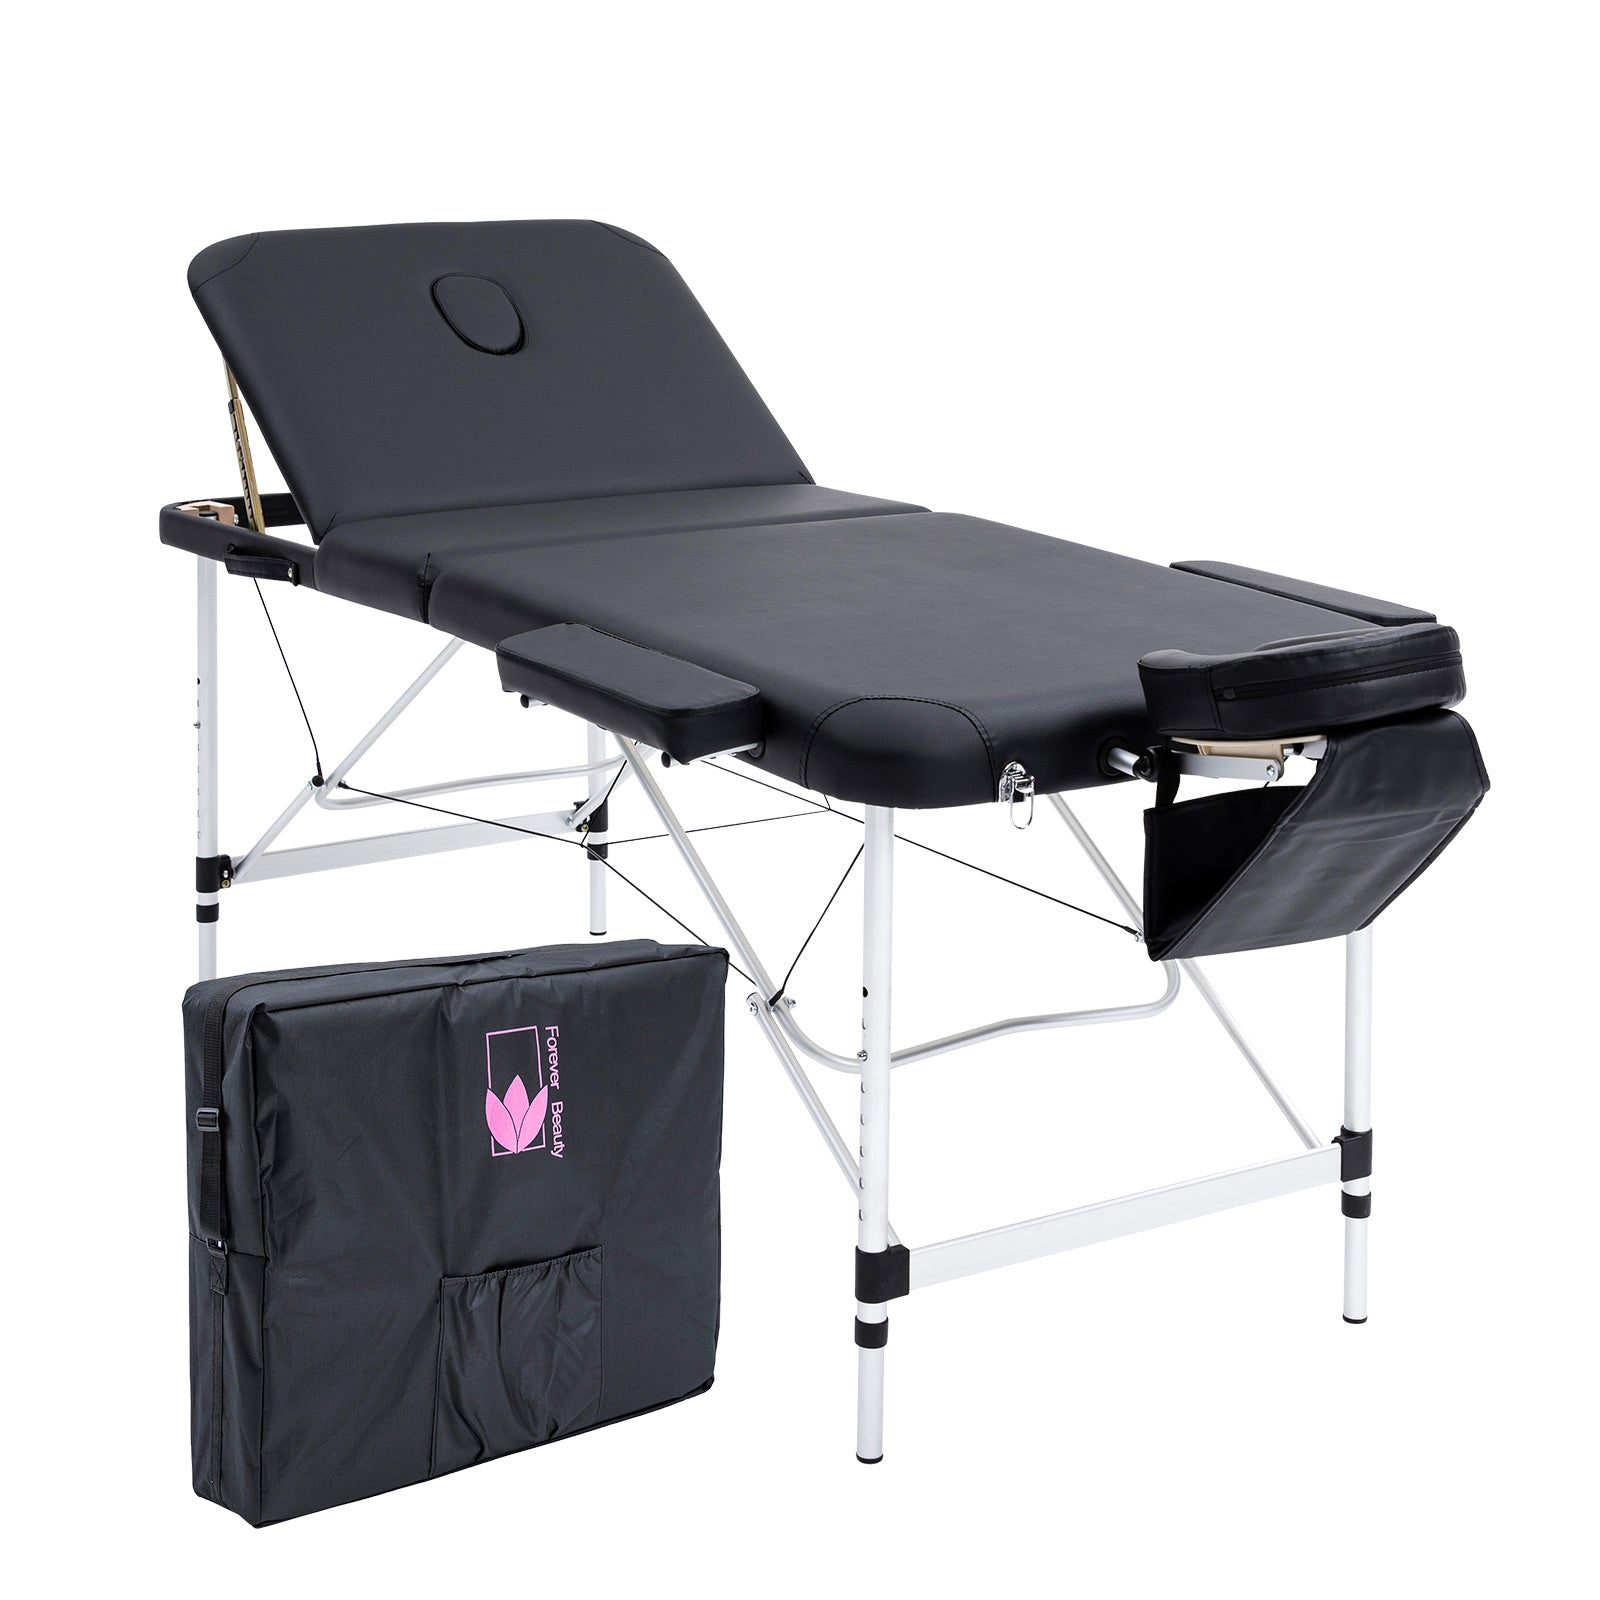 Forever Beauty Black Portable Beauty Massage Table Bed Therapy Waxing 3 Fold 70cm Aluminium - SILBERSHELL